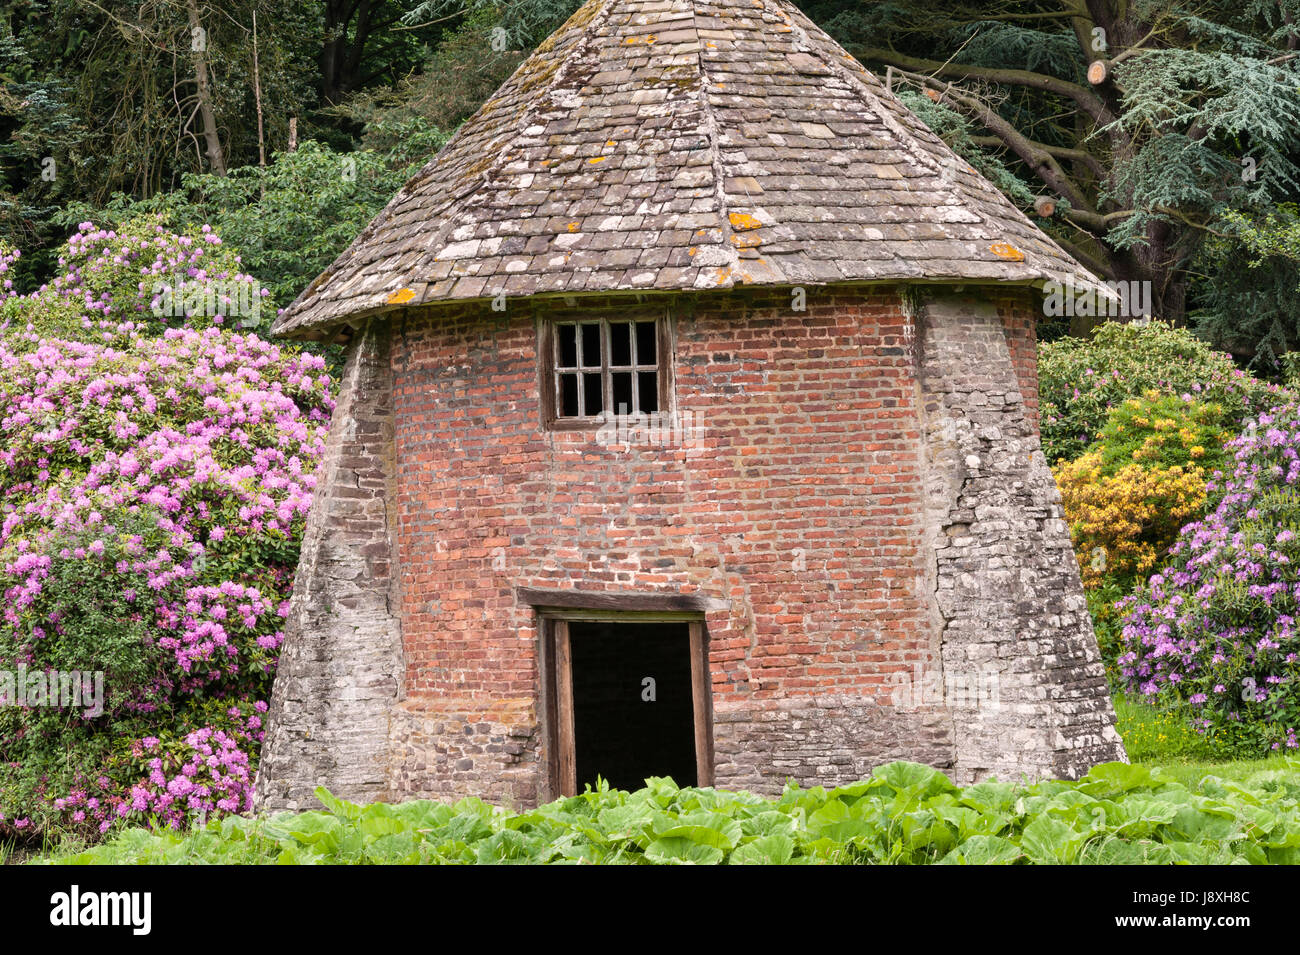 The Guardhouse or Garden House at Llanvihangel Court, Llanvihangel Crucorney, Abergavenny, Wales, UK. A 16c mansion with fine gardens Stock Photo